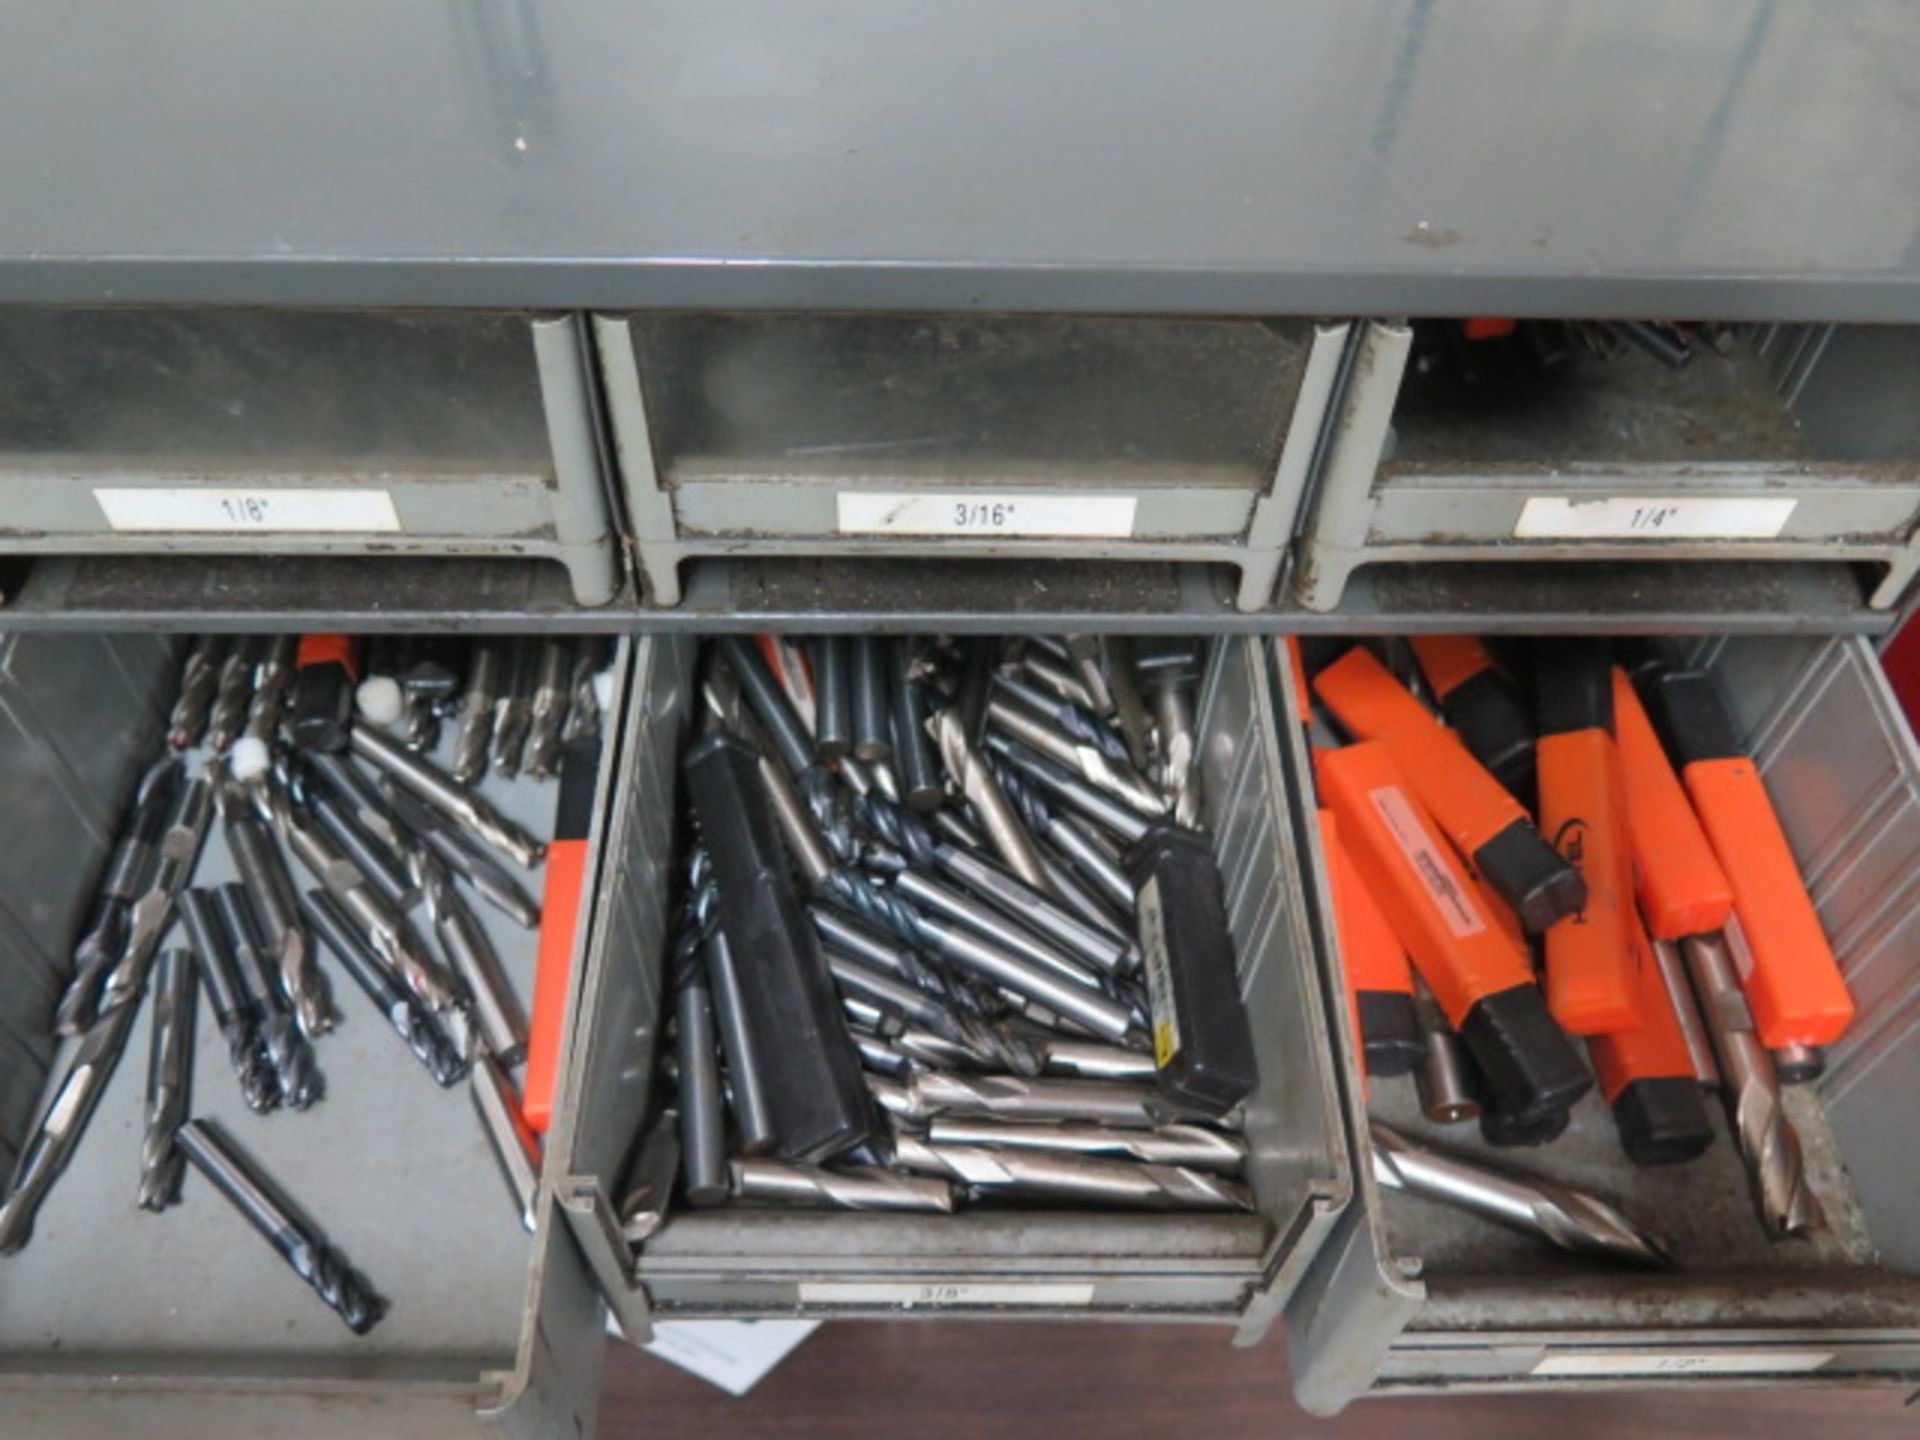 Carbide and High Speed Endmills, Carbide Inserts, Mill Slot Cutters and Hardware w/ Cabinets (SOLD - Image 3 of 8